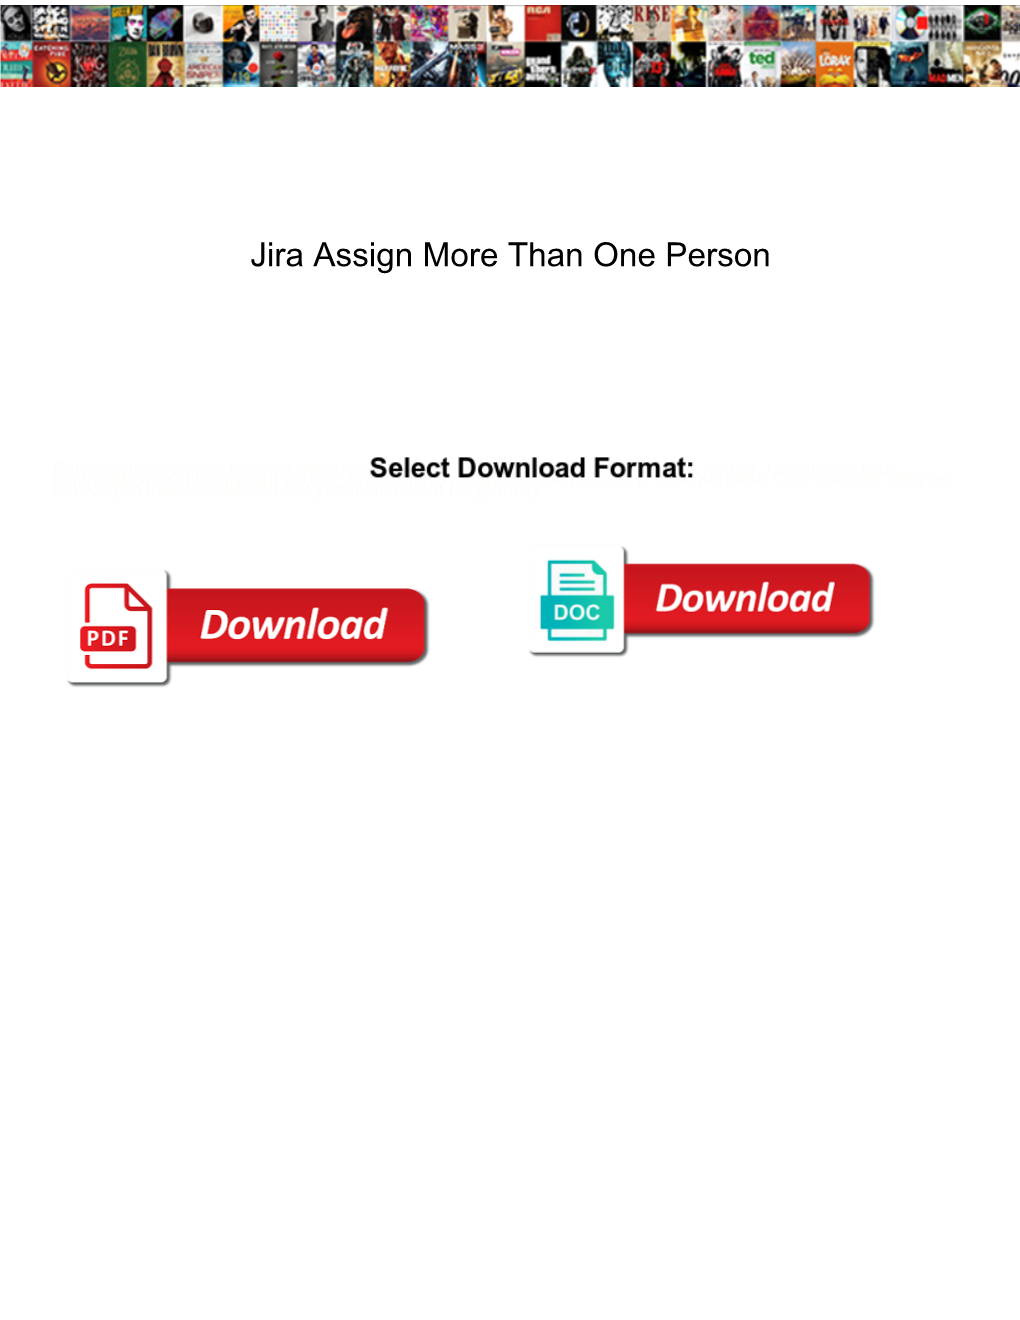 Jira Assign More Than One Person